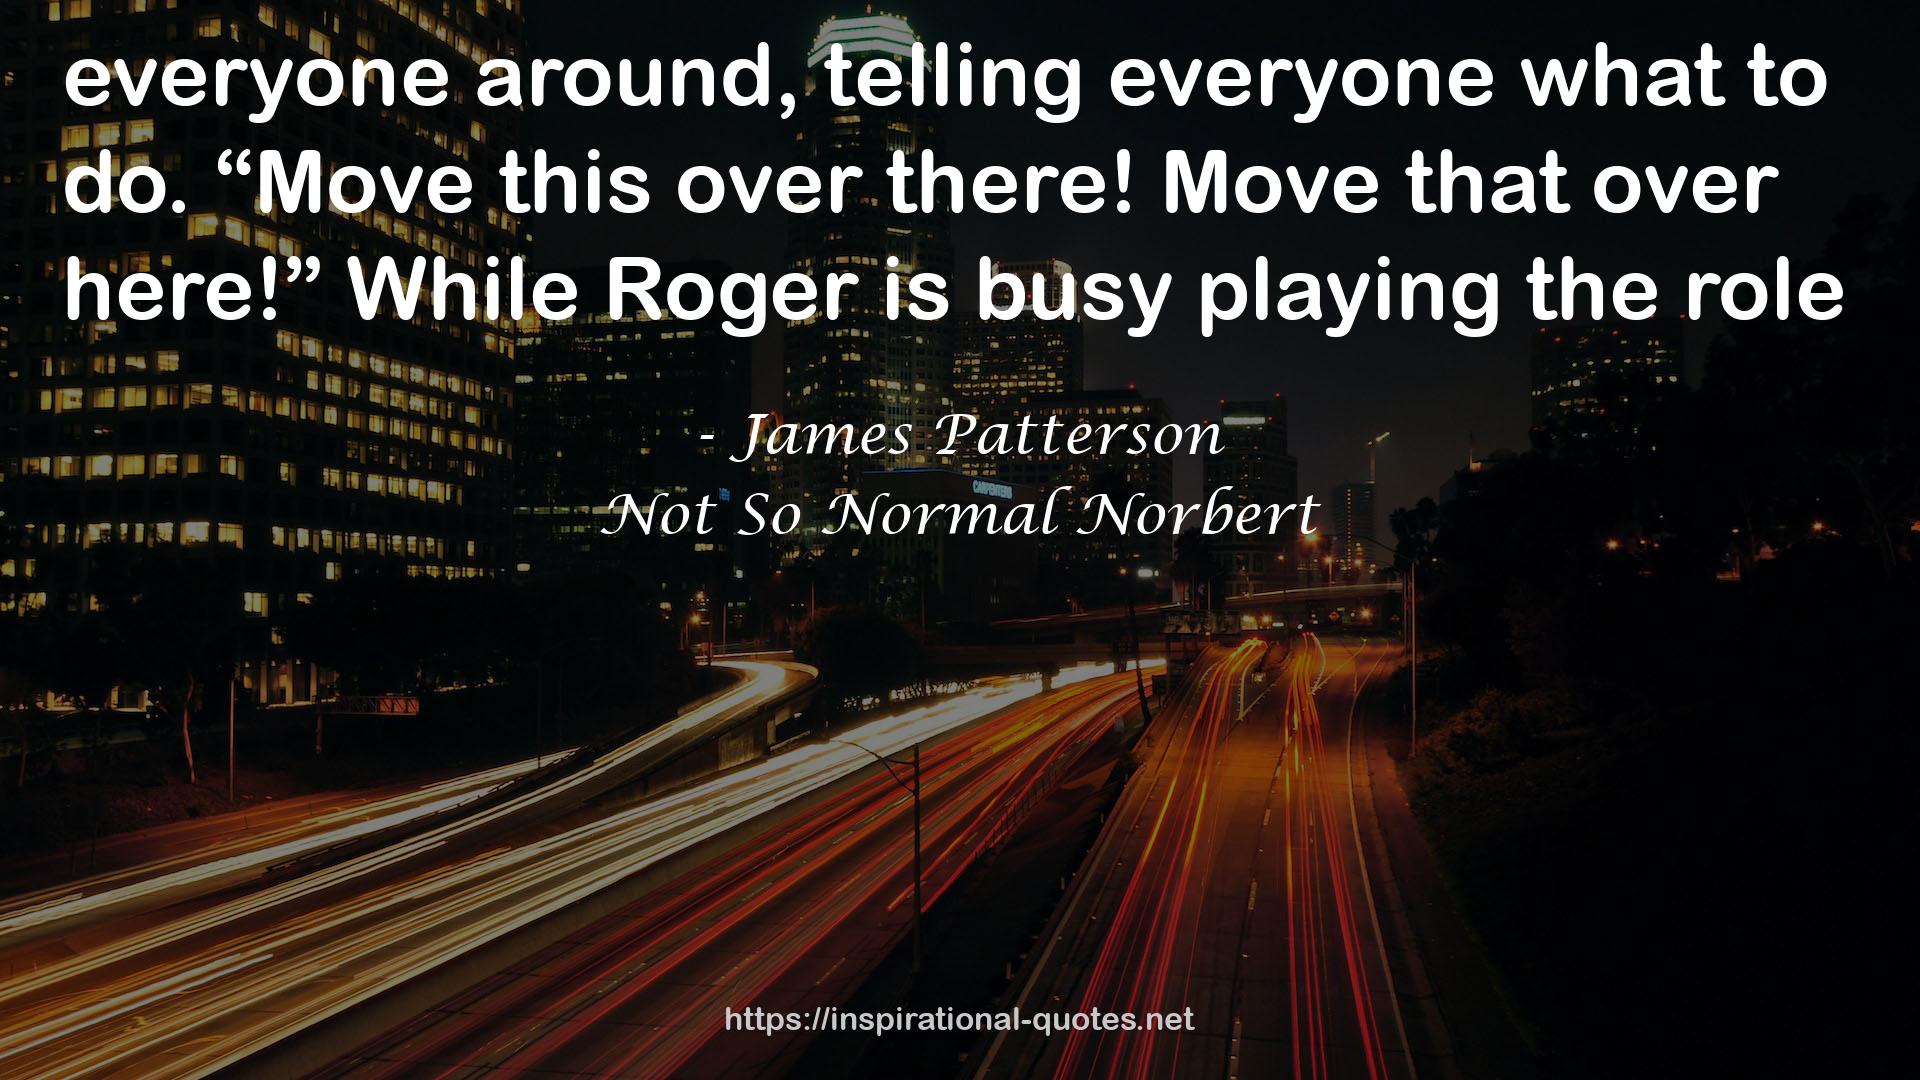 Not So Normal Norbert QUOTES